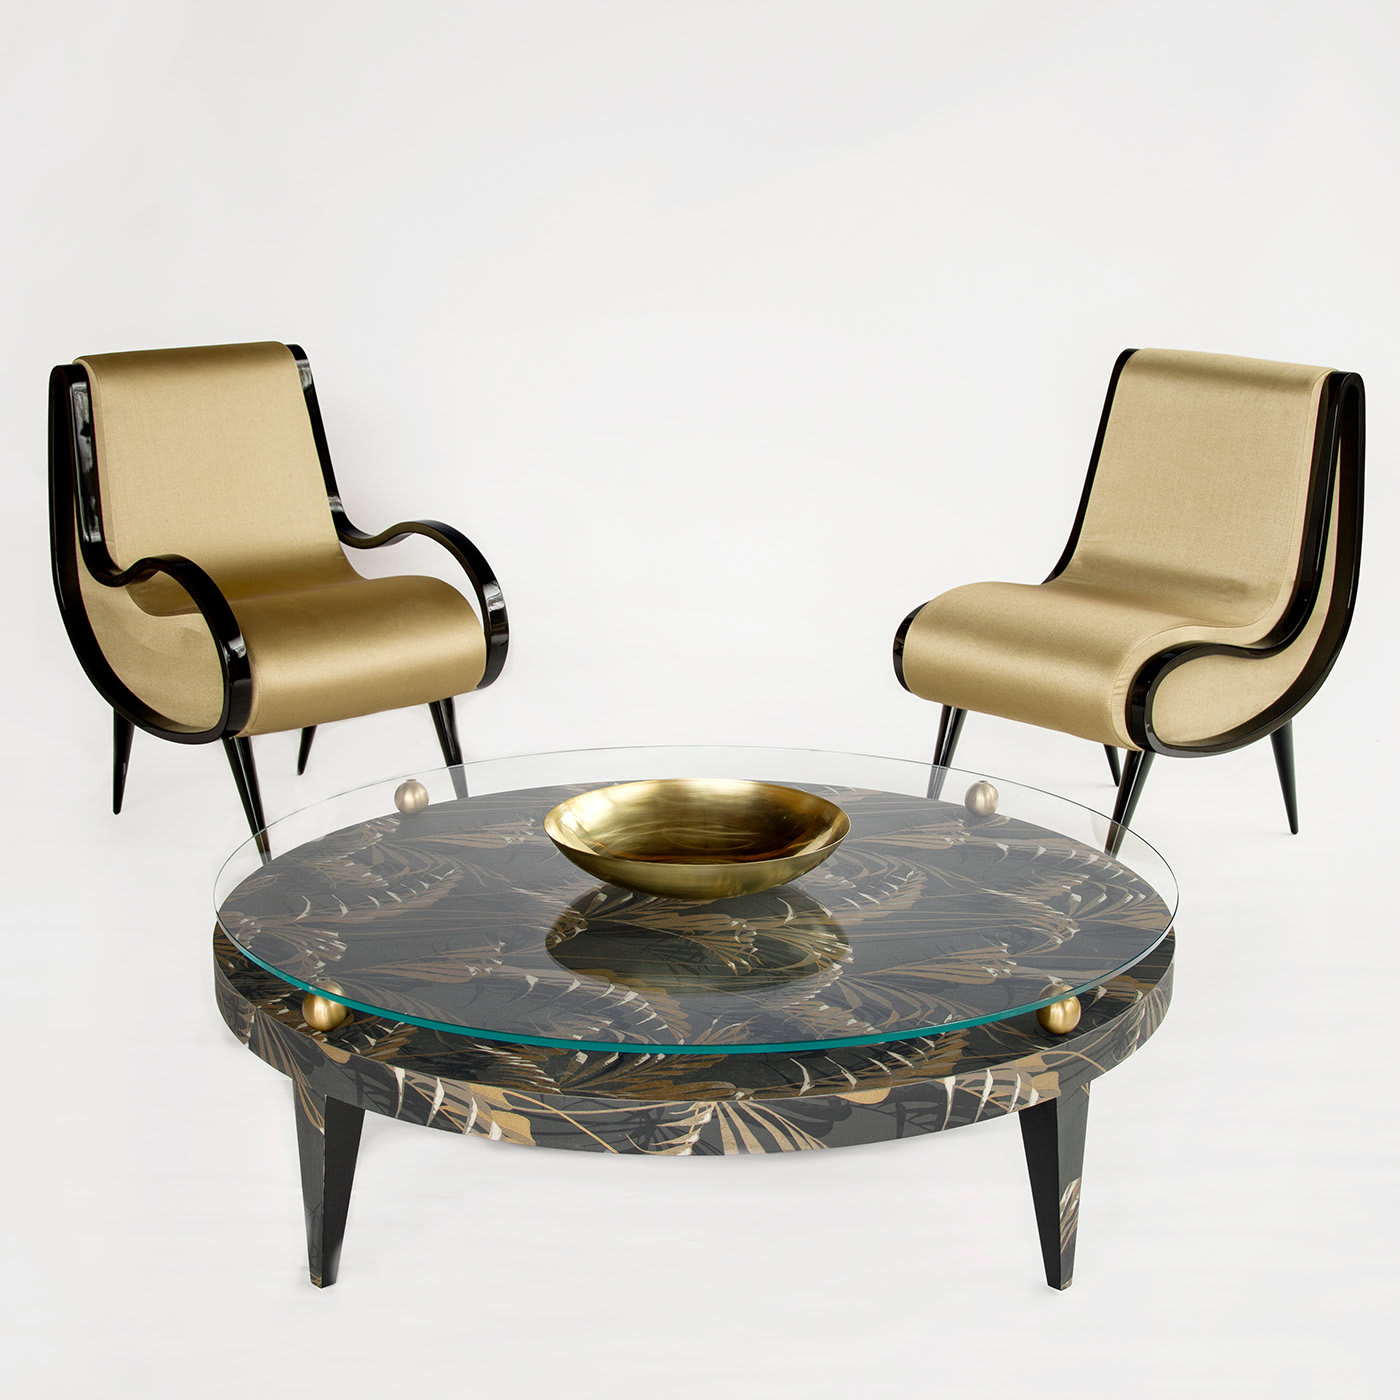 Eclipse armchair in gold fabric - Extroverso